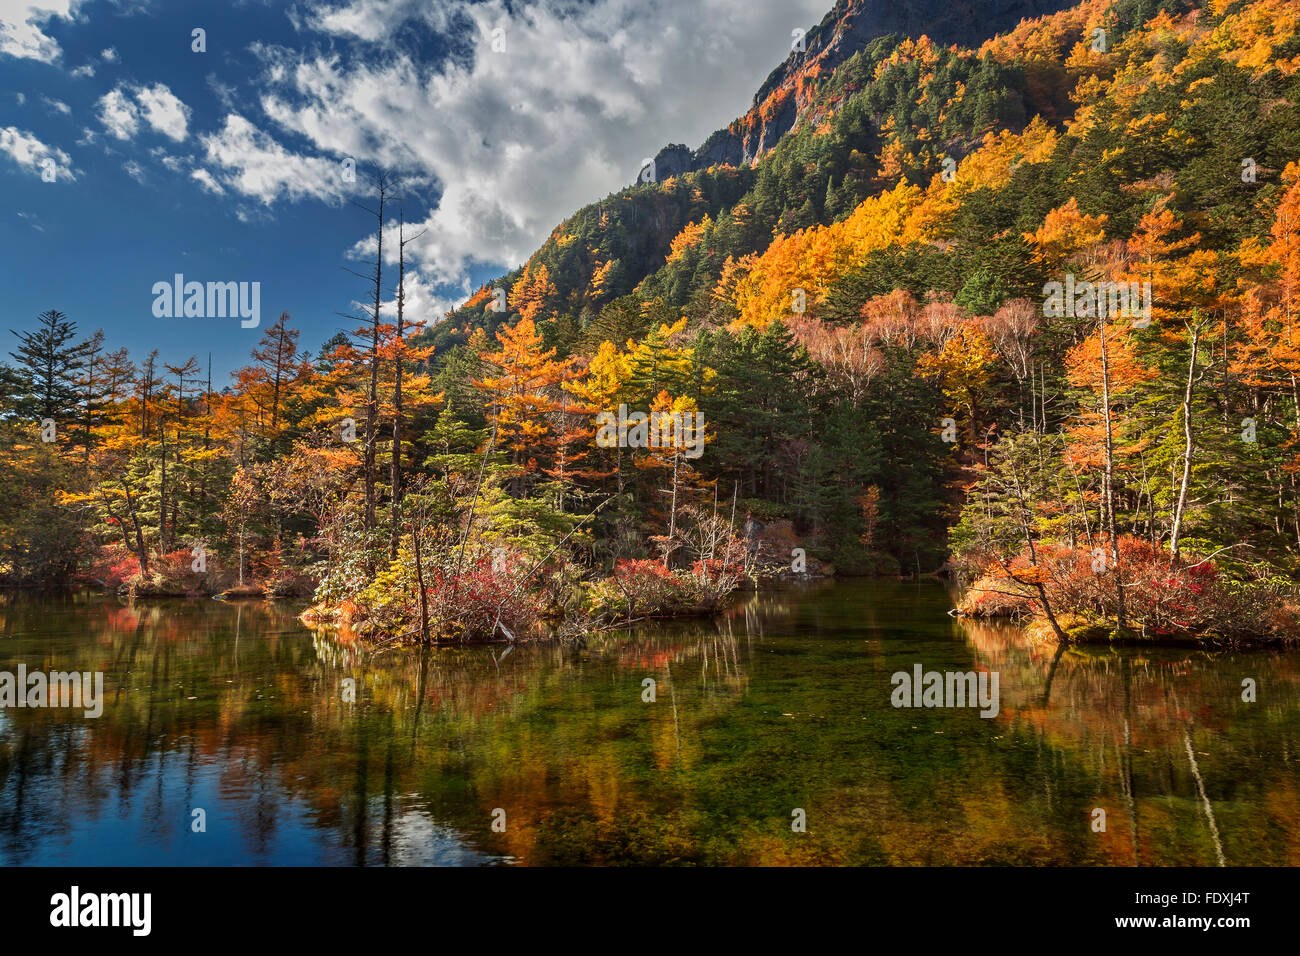 Colorful Autumn forest park in Hokkaido, Japan Stock Photo